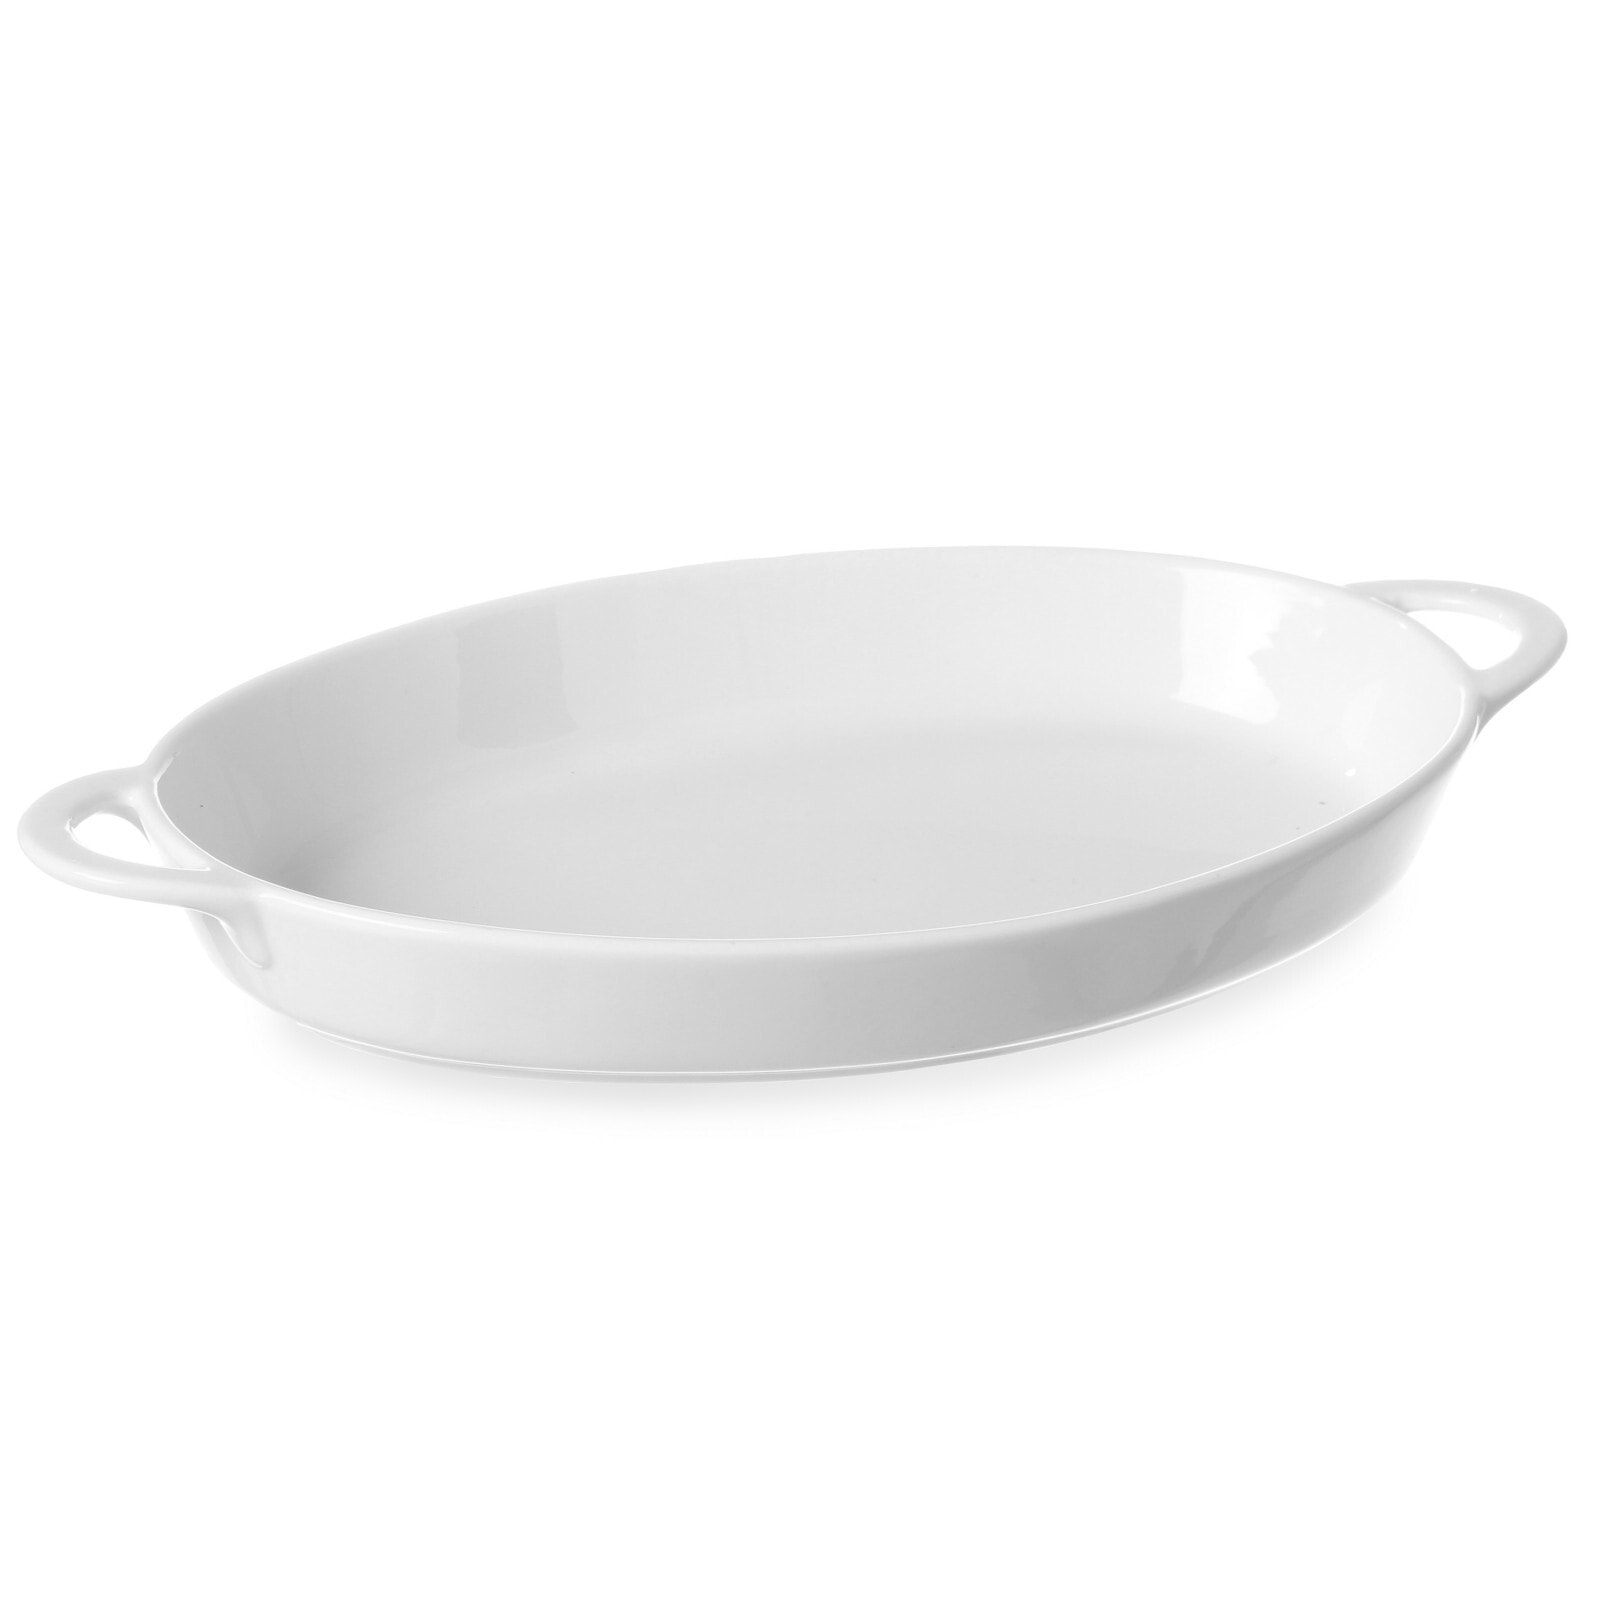 Oval baking dish with handles 215x140x35mm white porcelain - Hendi 784013